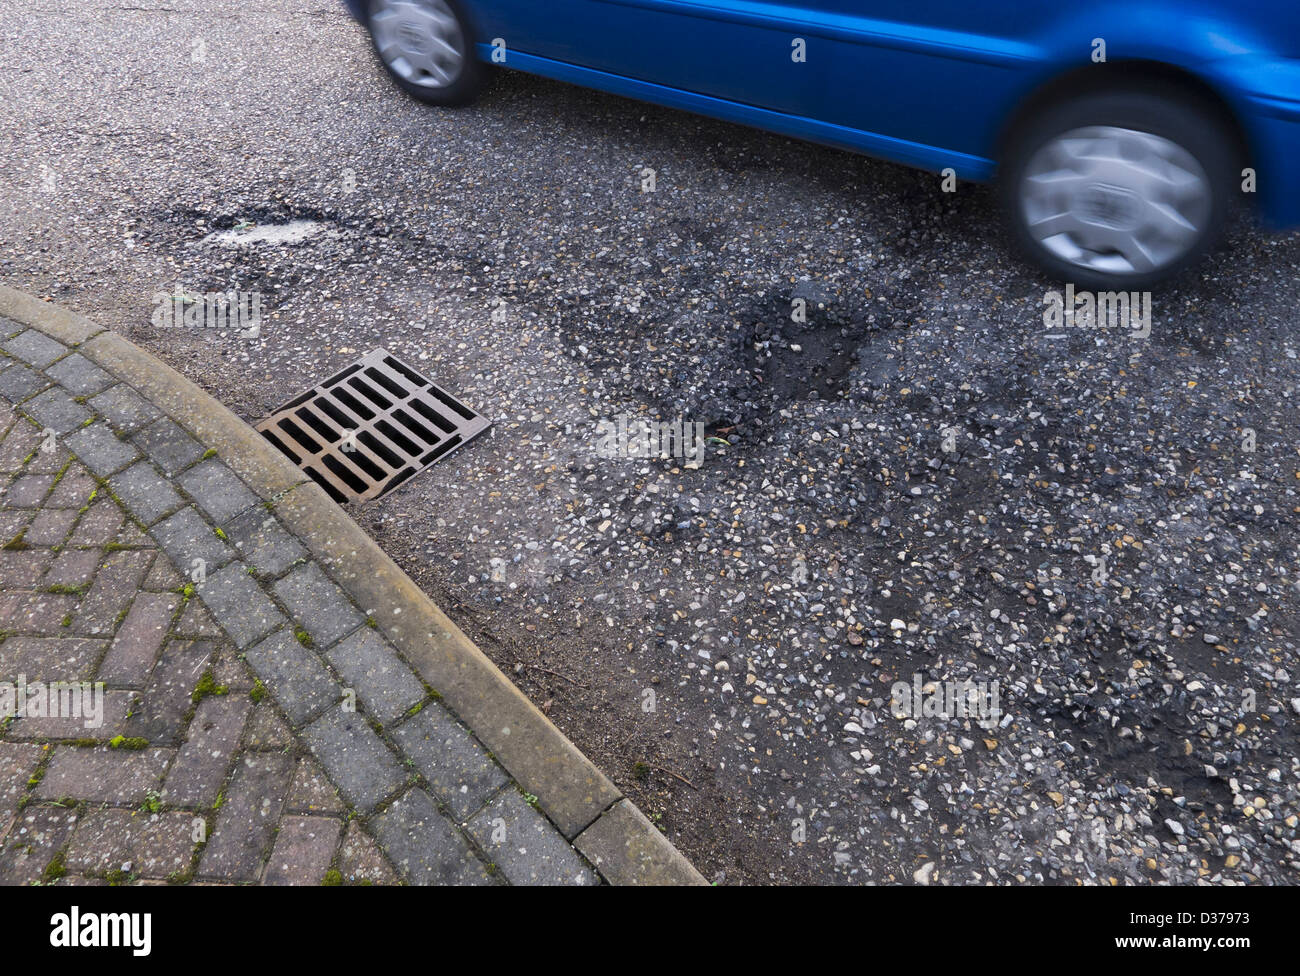 Car driving past potholes and a crumbling road surface. Stock Photo